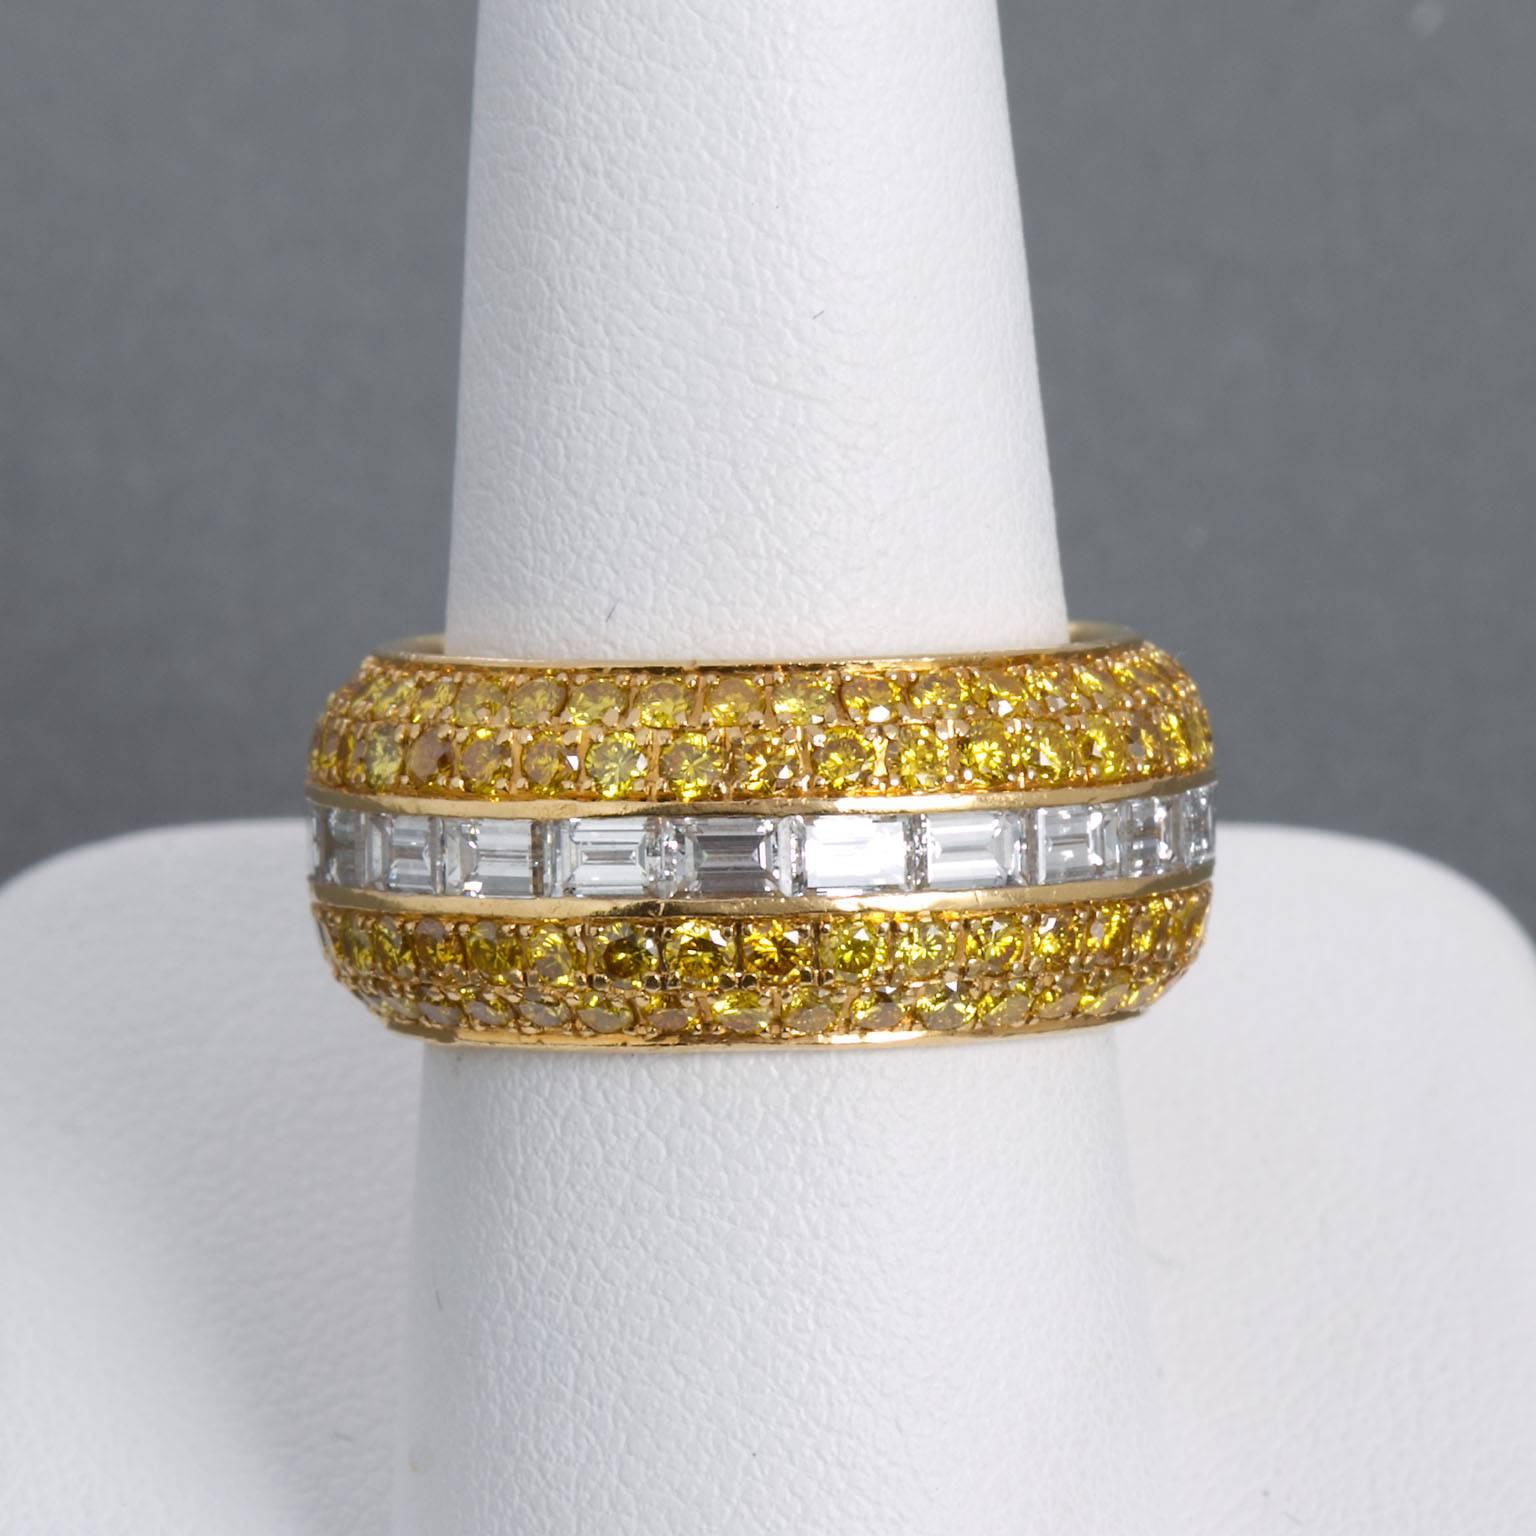 A wide fancy yellow and white diamond in 18 karat yellow gold band.  Set with 2.90 ctw of pavé set vivid yellow round brilliant cut diamonds and 2.90 ctw of channel set baguette cut white diamonds. Signed and hallmarked by Alan Friedman of Beverly